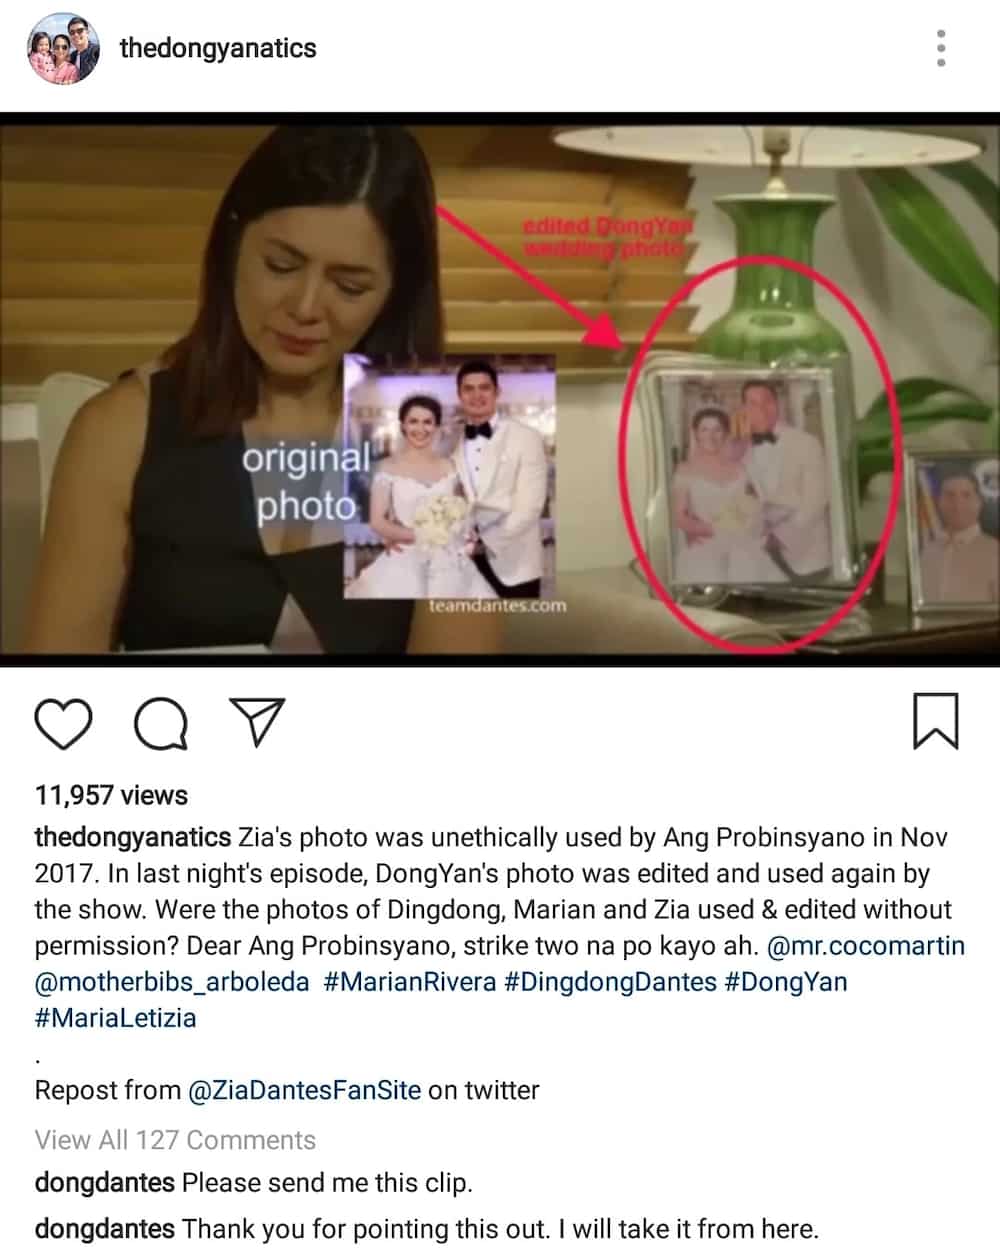 Dingdong Dantes reacts to alleged unethical use of Zia and DongYan photos in 'Ang Probinsiyano'